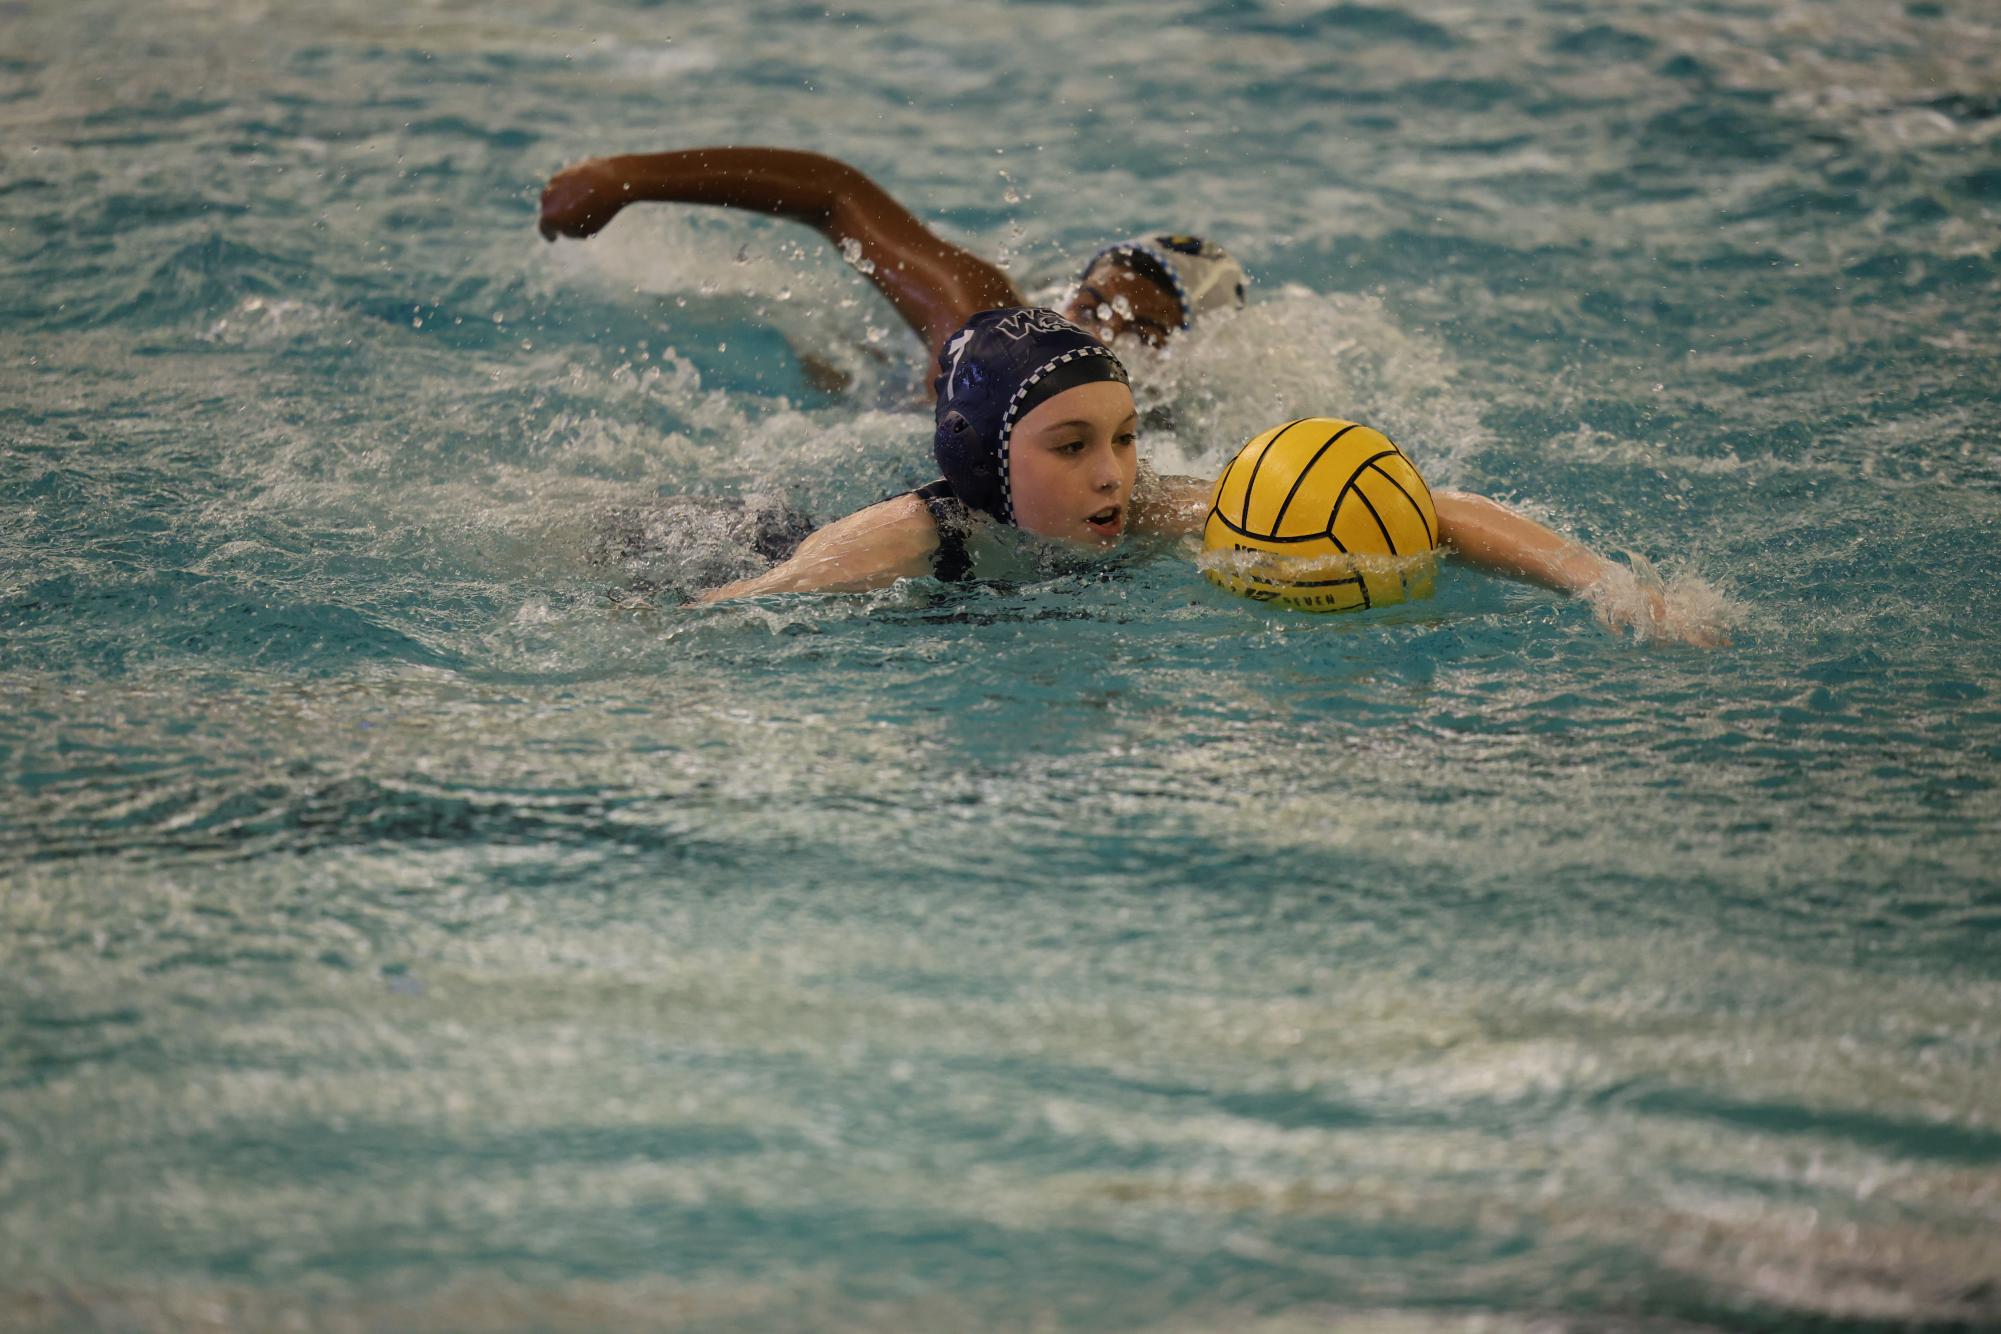 Ready to receive a pass, Taylor Owens, a freshman varsity water polo player swims forward towards the goal. The Senior game against Rock Hill provided an opportunity for many freshmen to get playing time. Owens, Quinn Geyter, and June Horton, all freshmen varsity water polo players new to the sport, got lots of opportunities to showcase their improvement from the first tournament. “It was tough because I hadn’t played that much before.” Geyter said, “But after the goal I scored, everything felt so much better.” This was Geyter’s second goal this season.